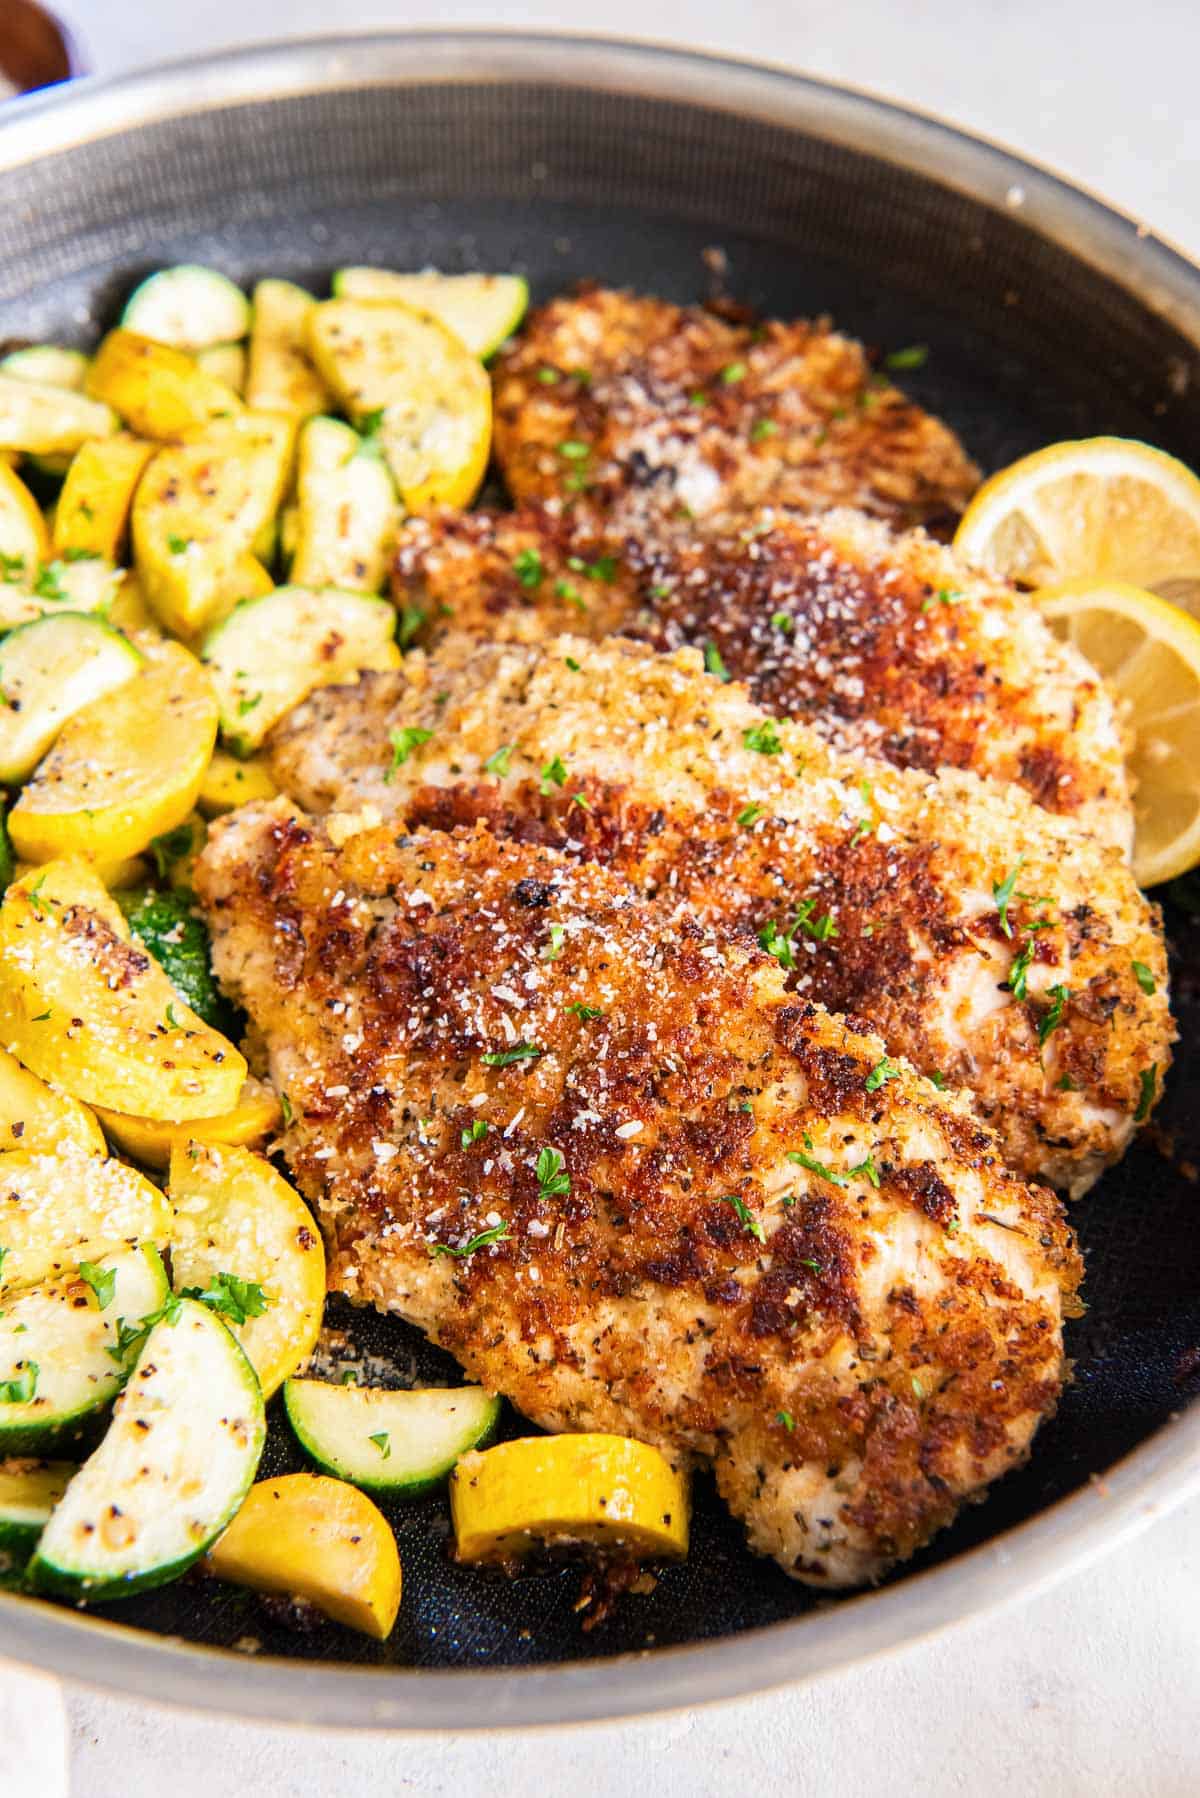 Cooked breaded chicken in a skillet with sliced zucchini.